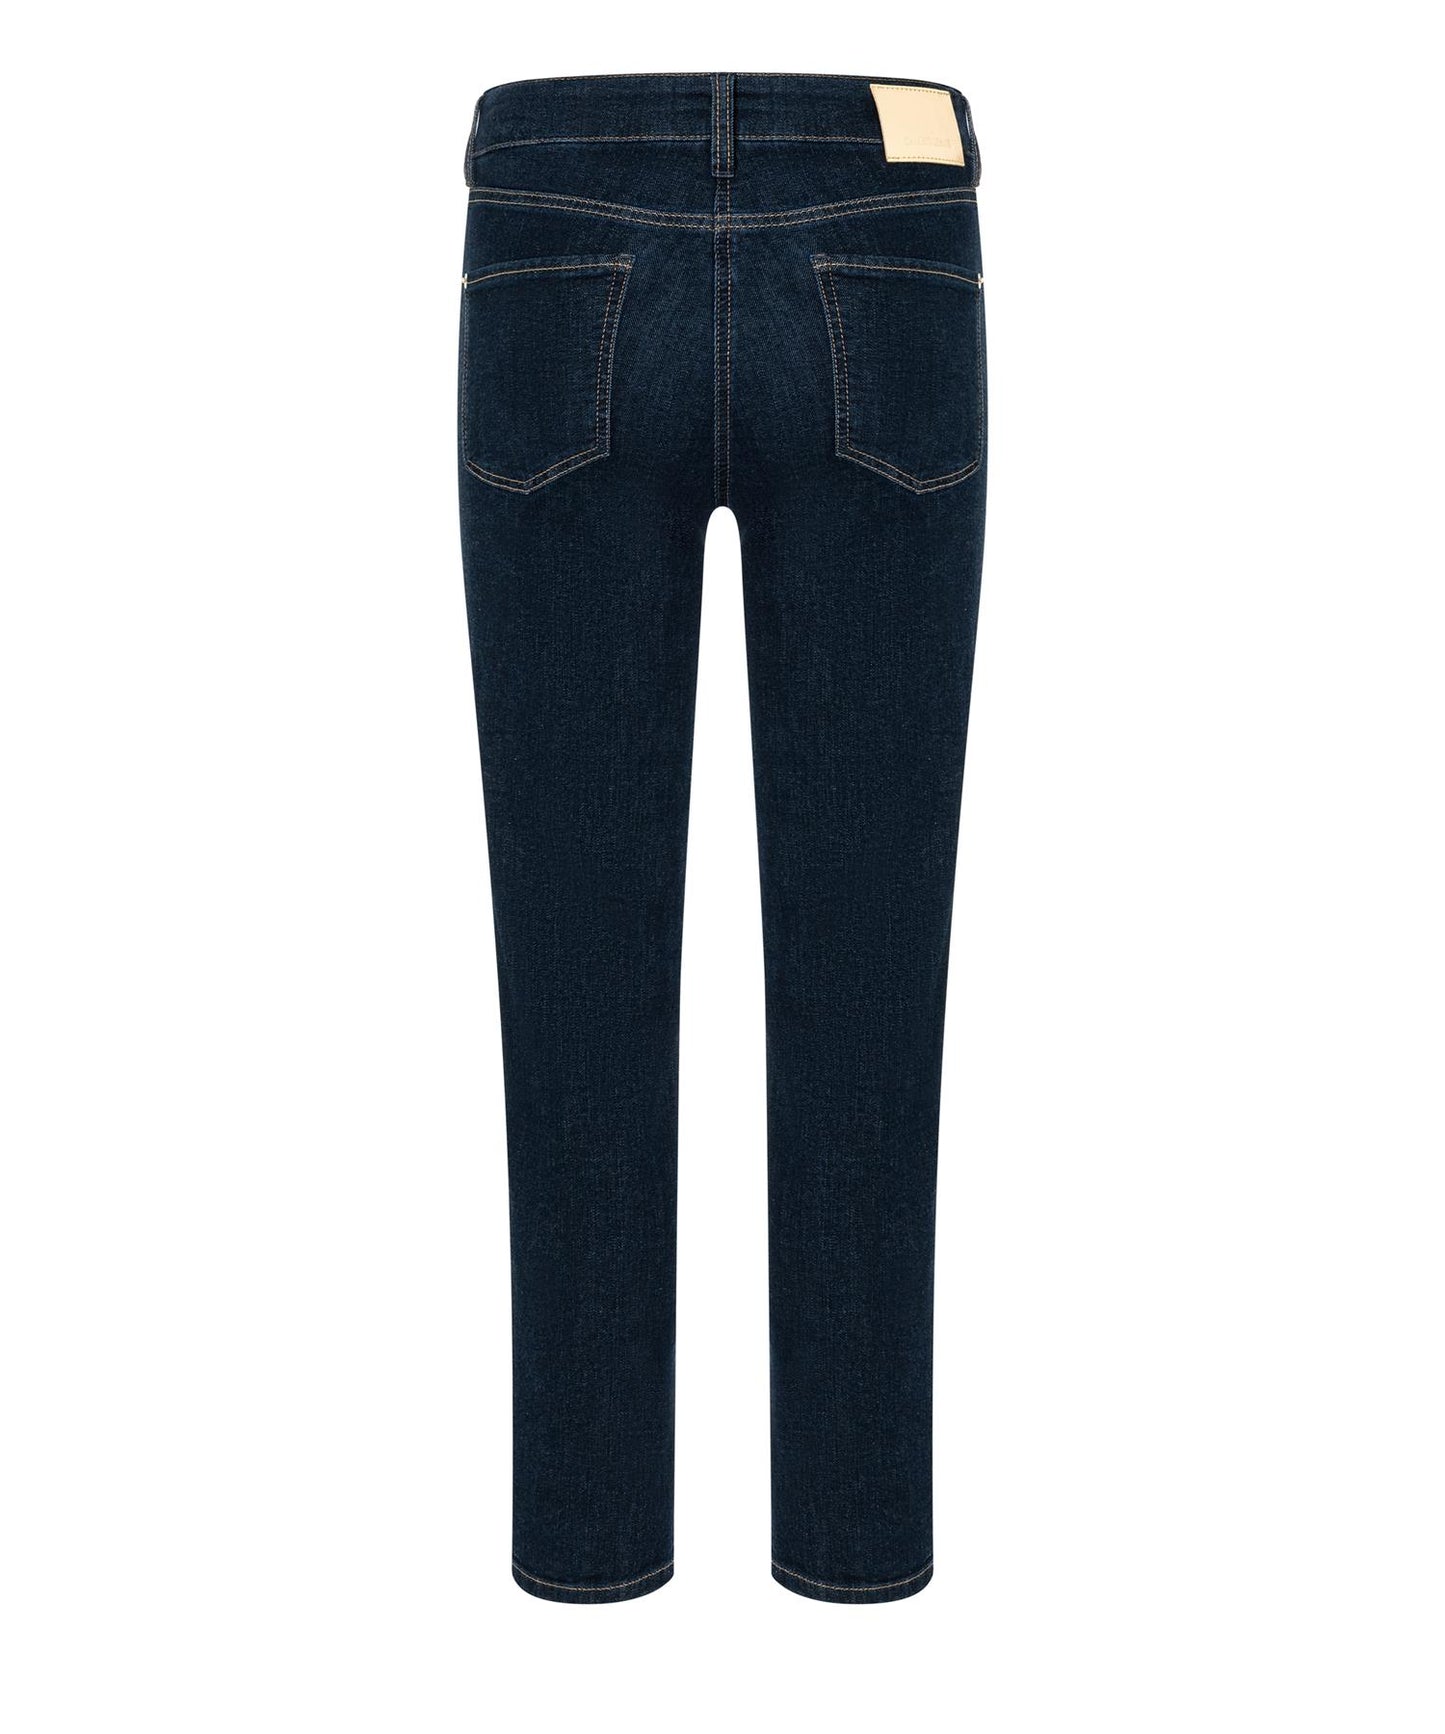 Piper cropped jeans modern rinsed